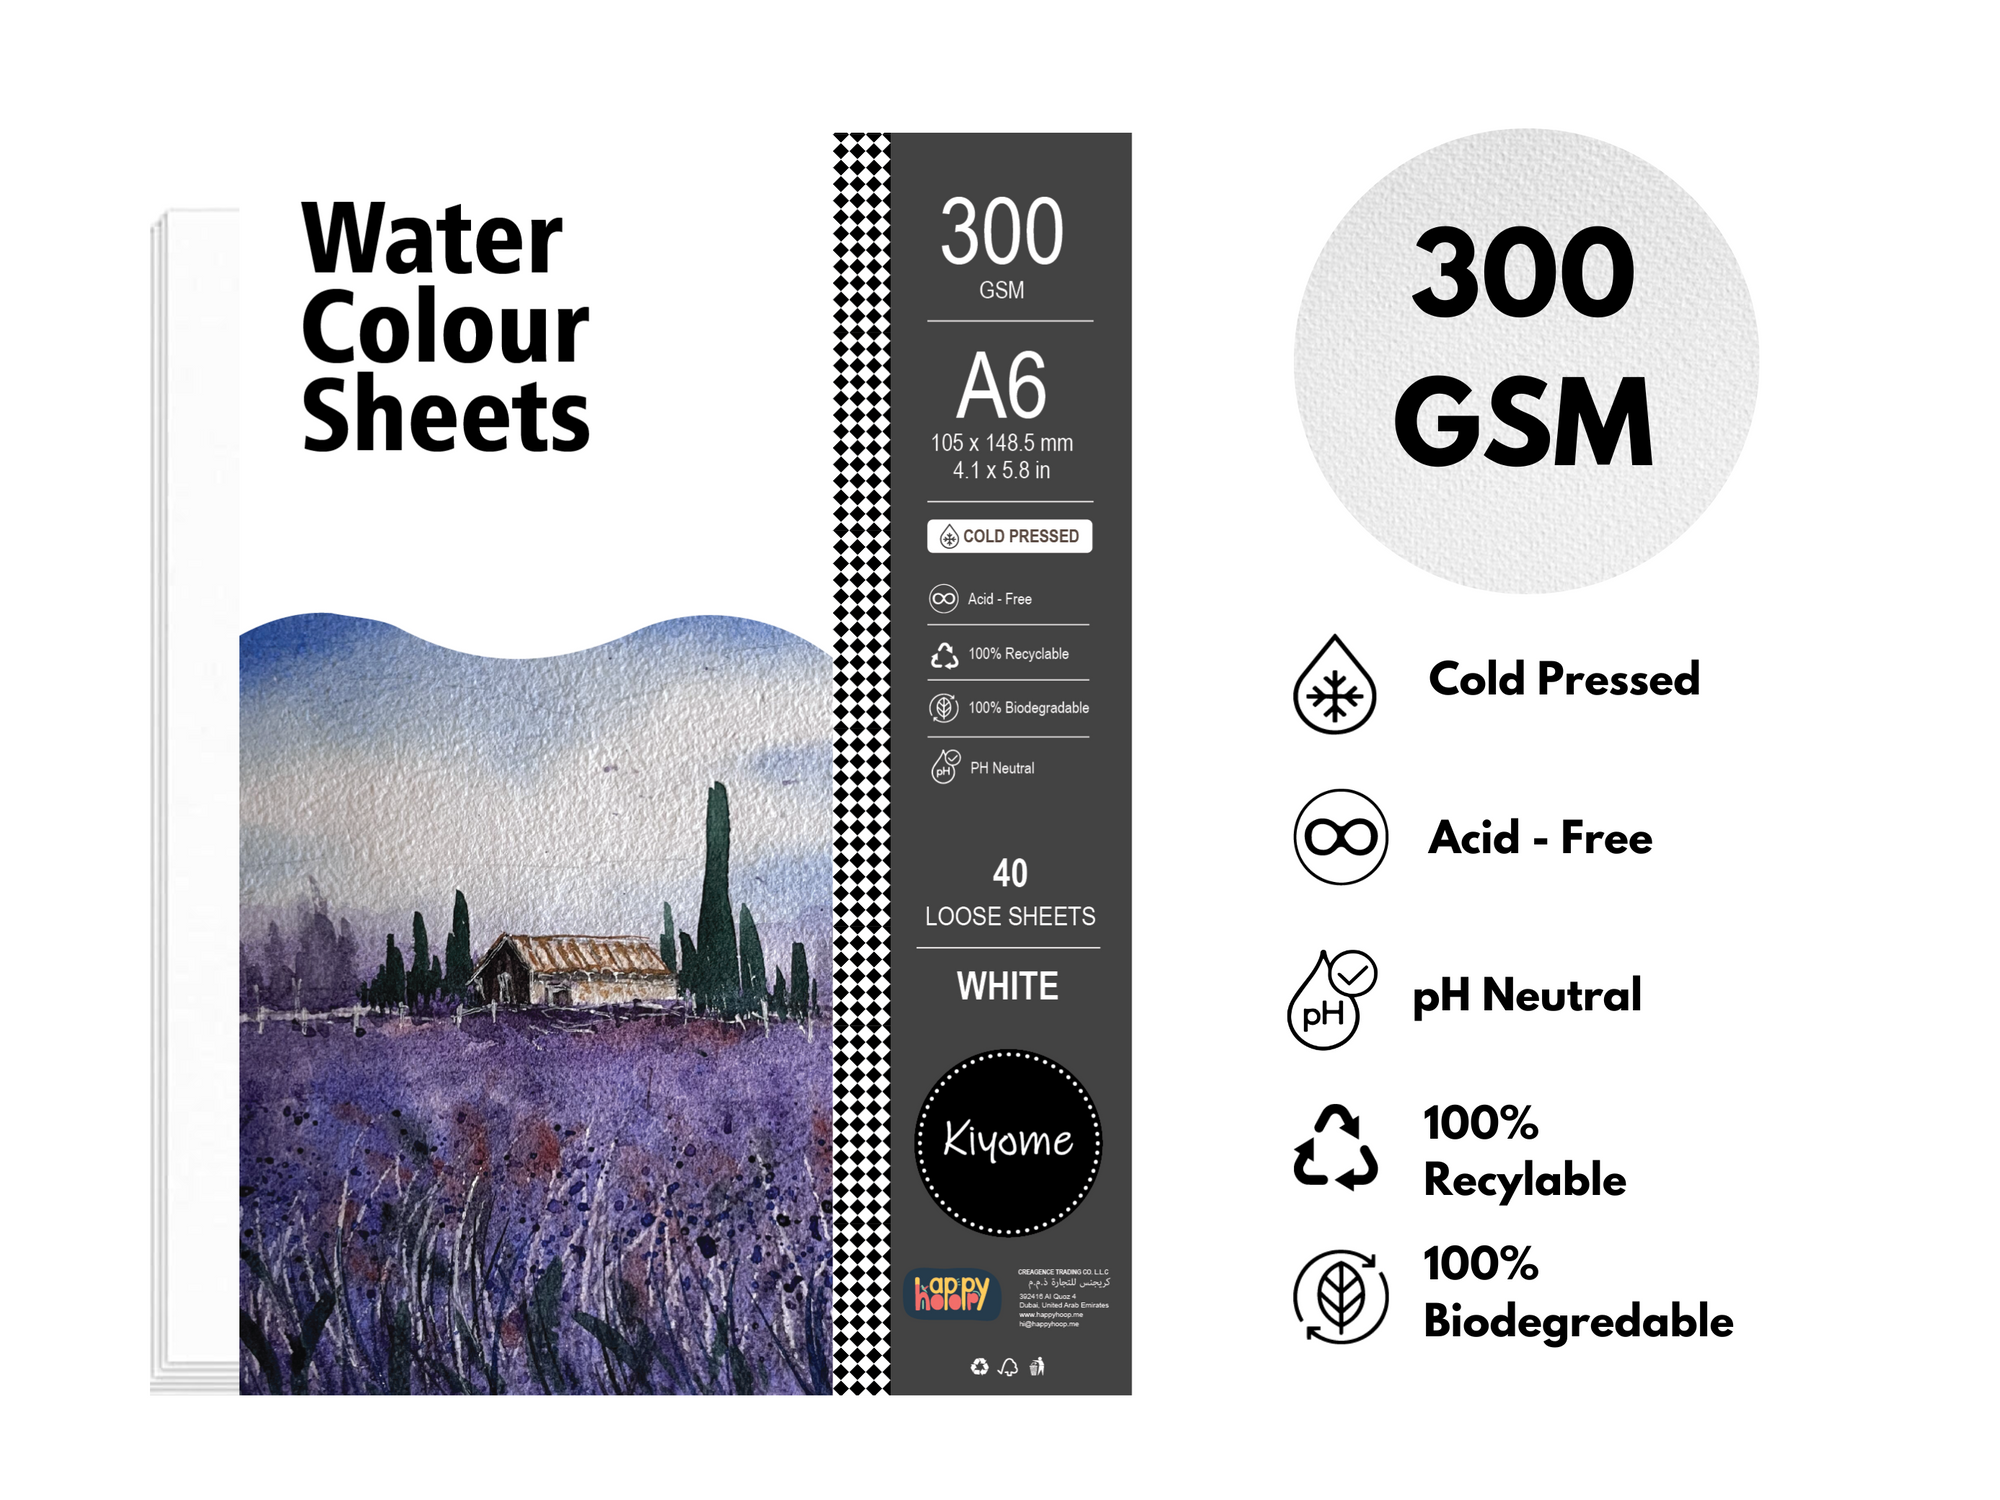 Kiyome Watercolour Sheets | Cold Pressed | 300 GSM | A6 | 40 Sheets